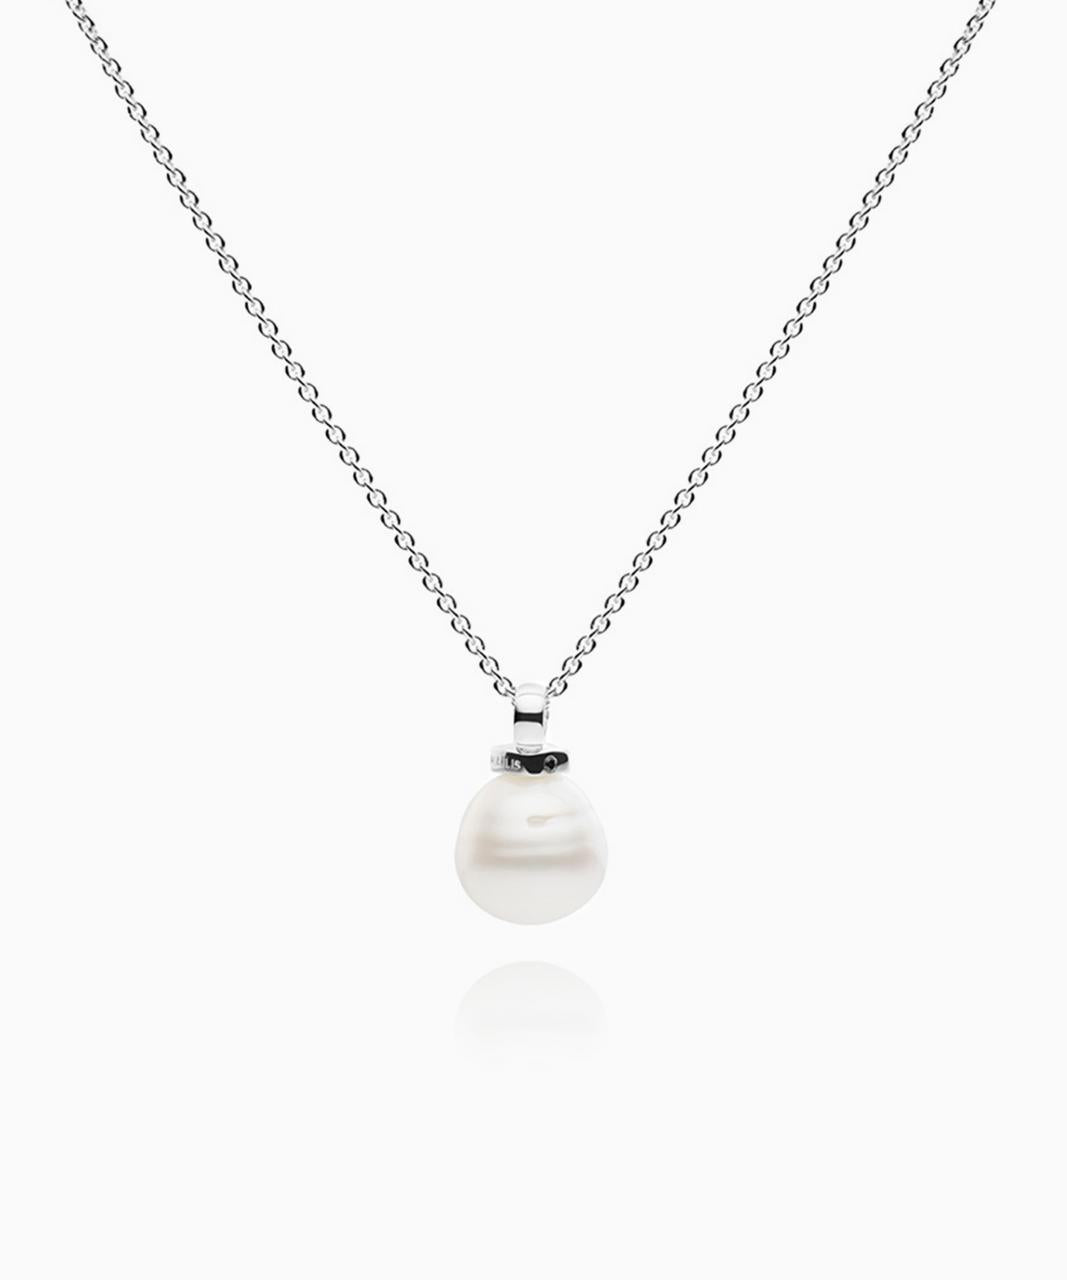 Kailis – Geometric Pearl Necklace, Sterling Silver